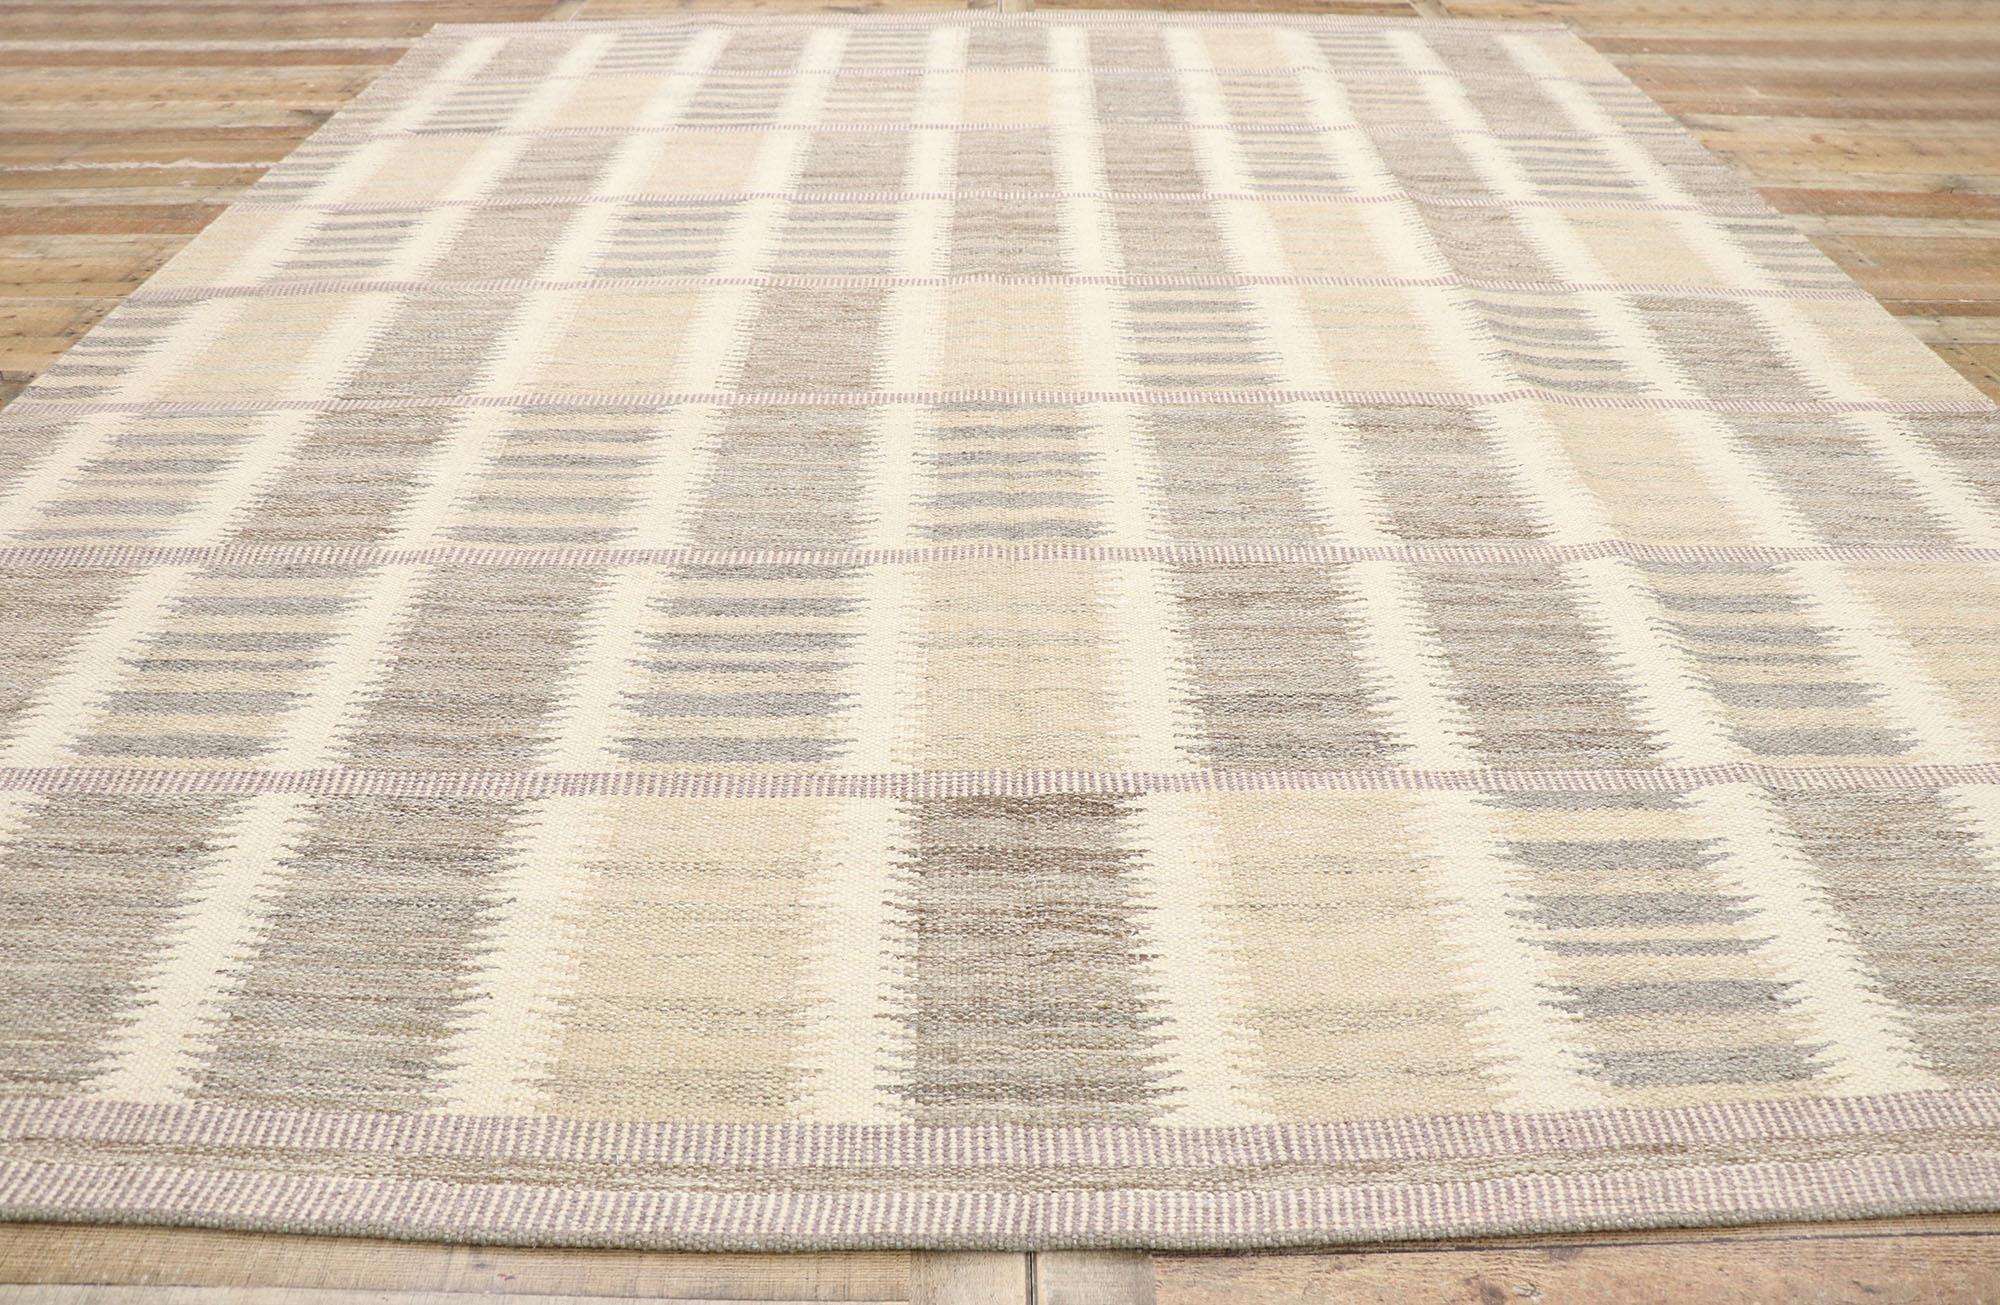 New Contemporary Swedish Inspired Kilim Rug with Scandinavian Modern Style 1